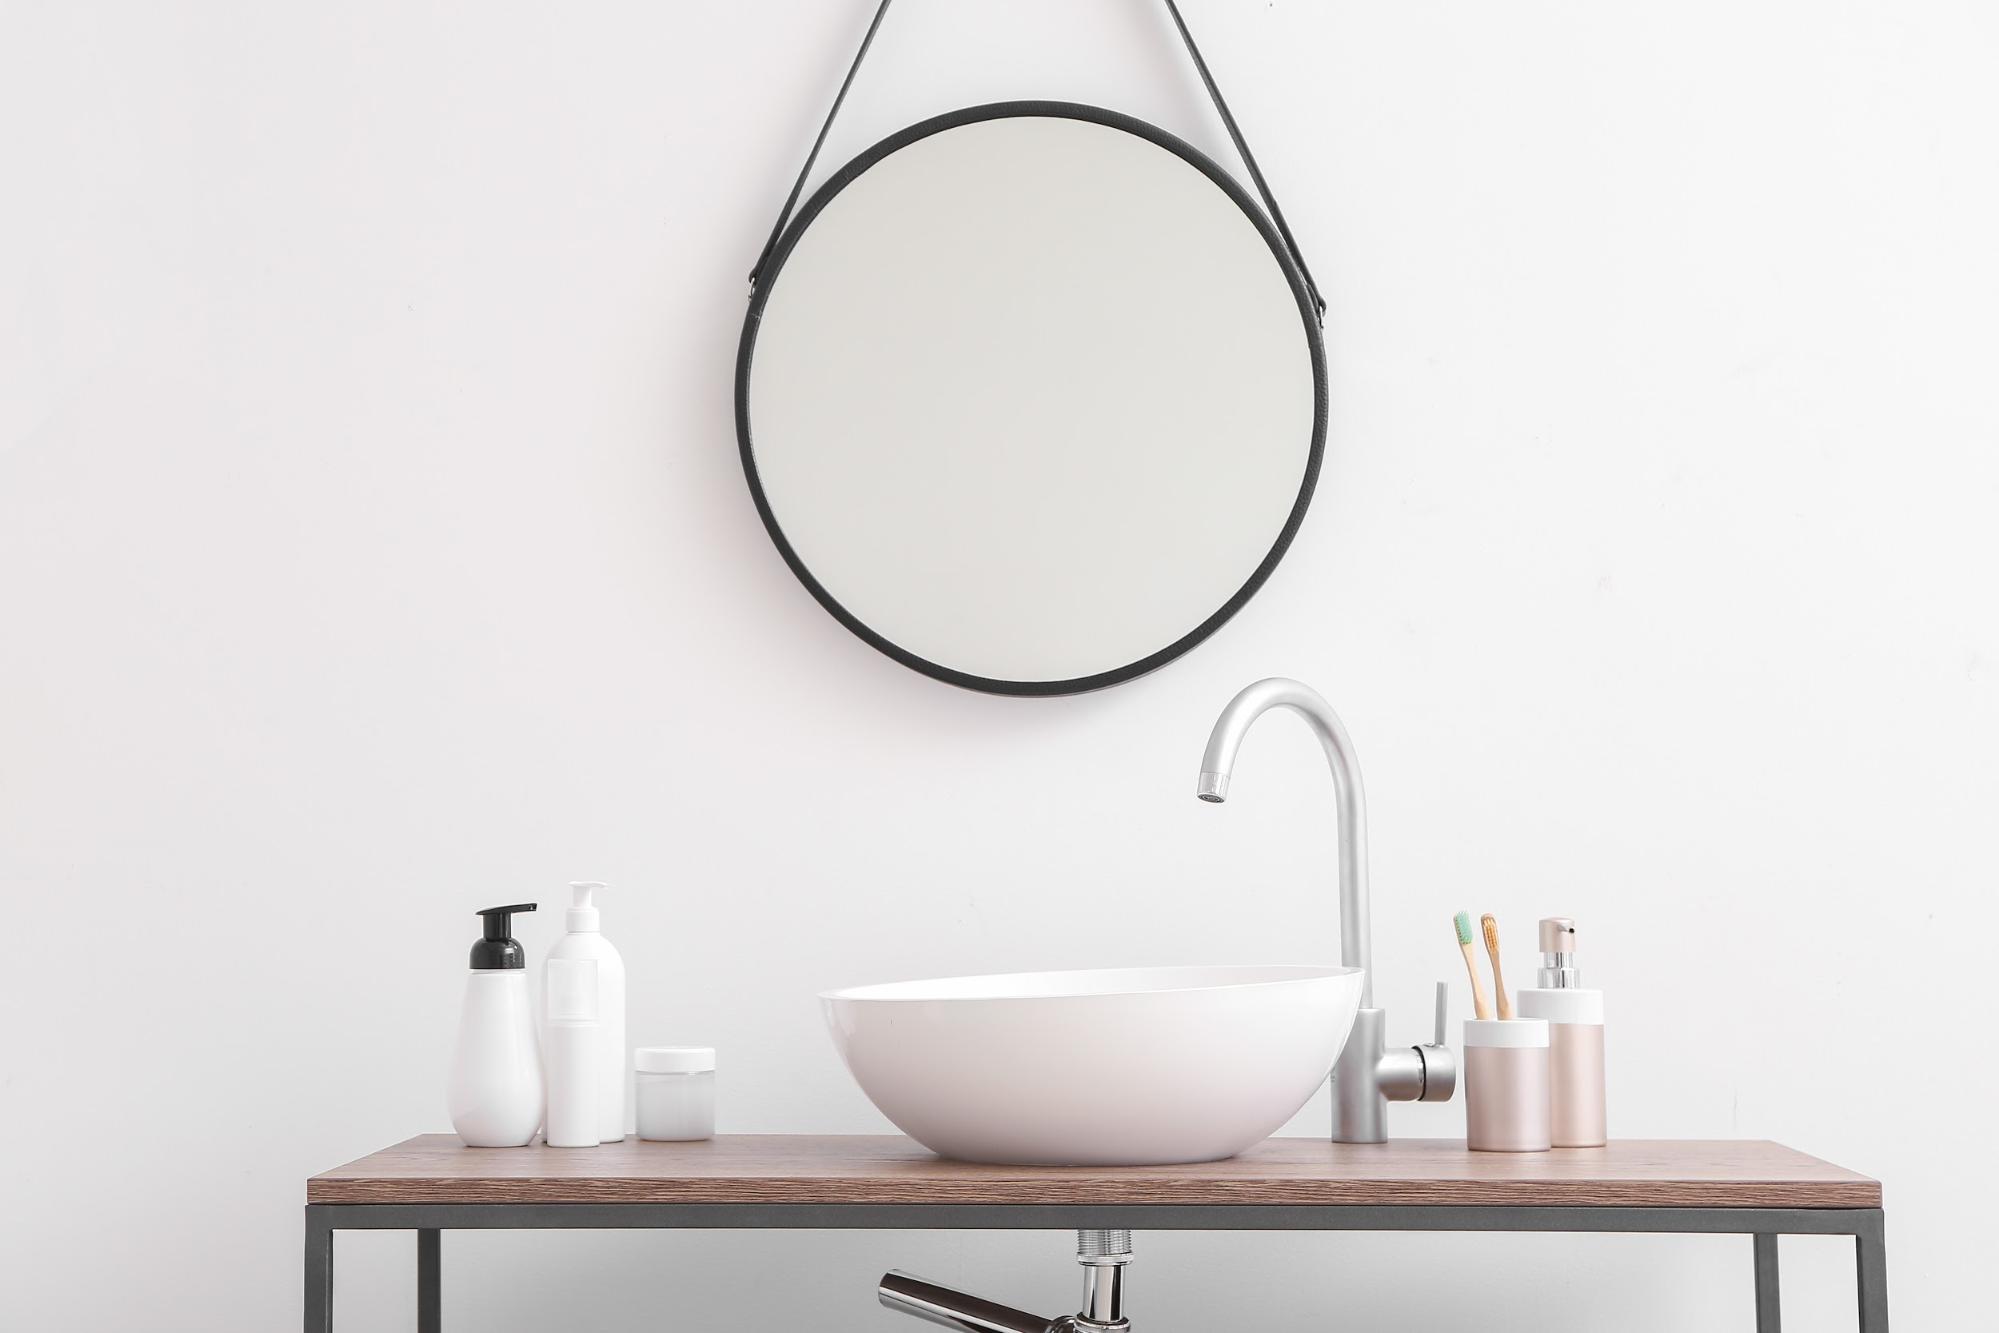 kitchen sink against a white wall with a round mirror 